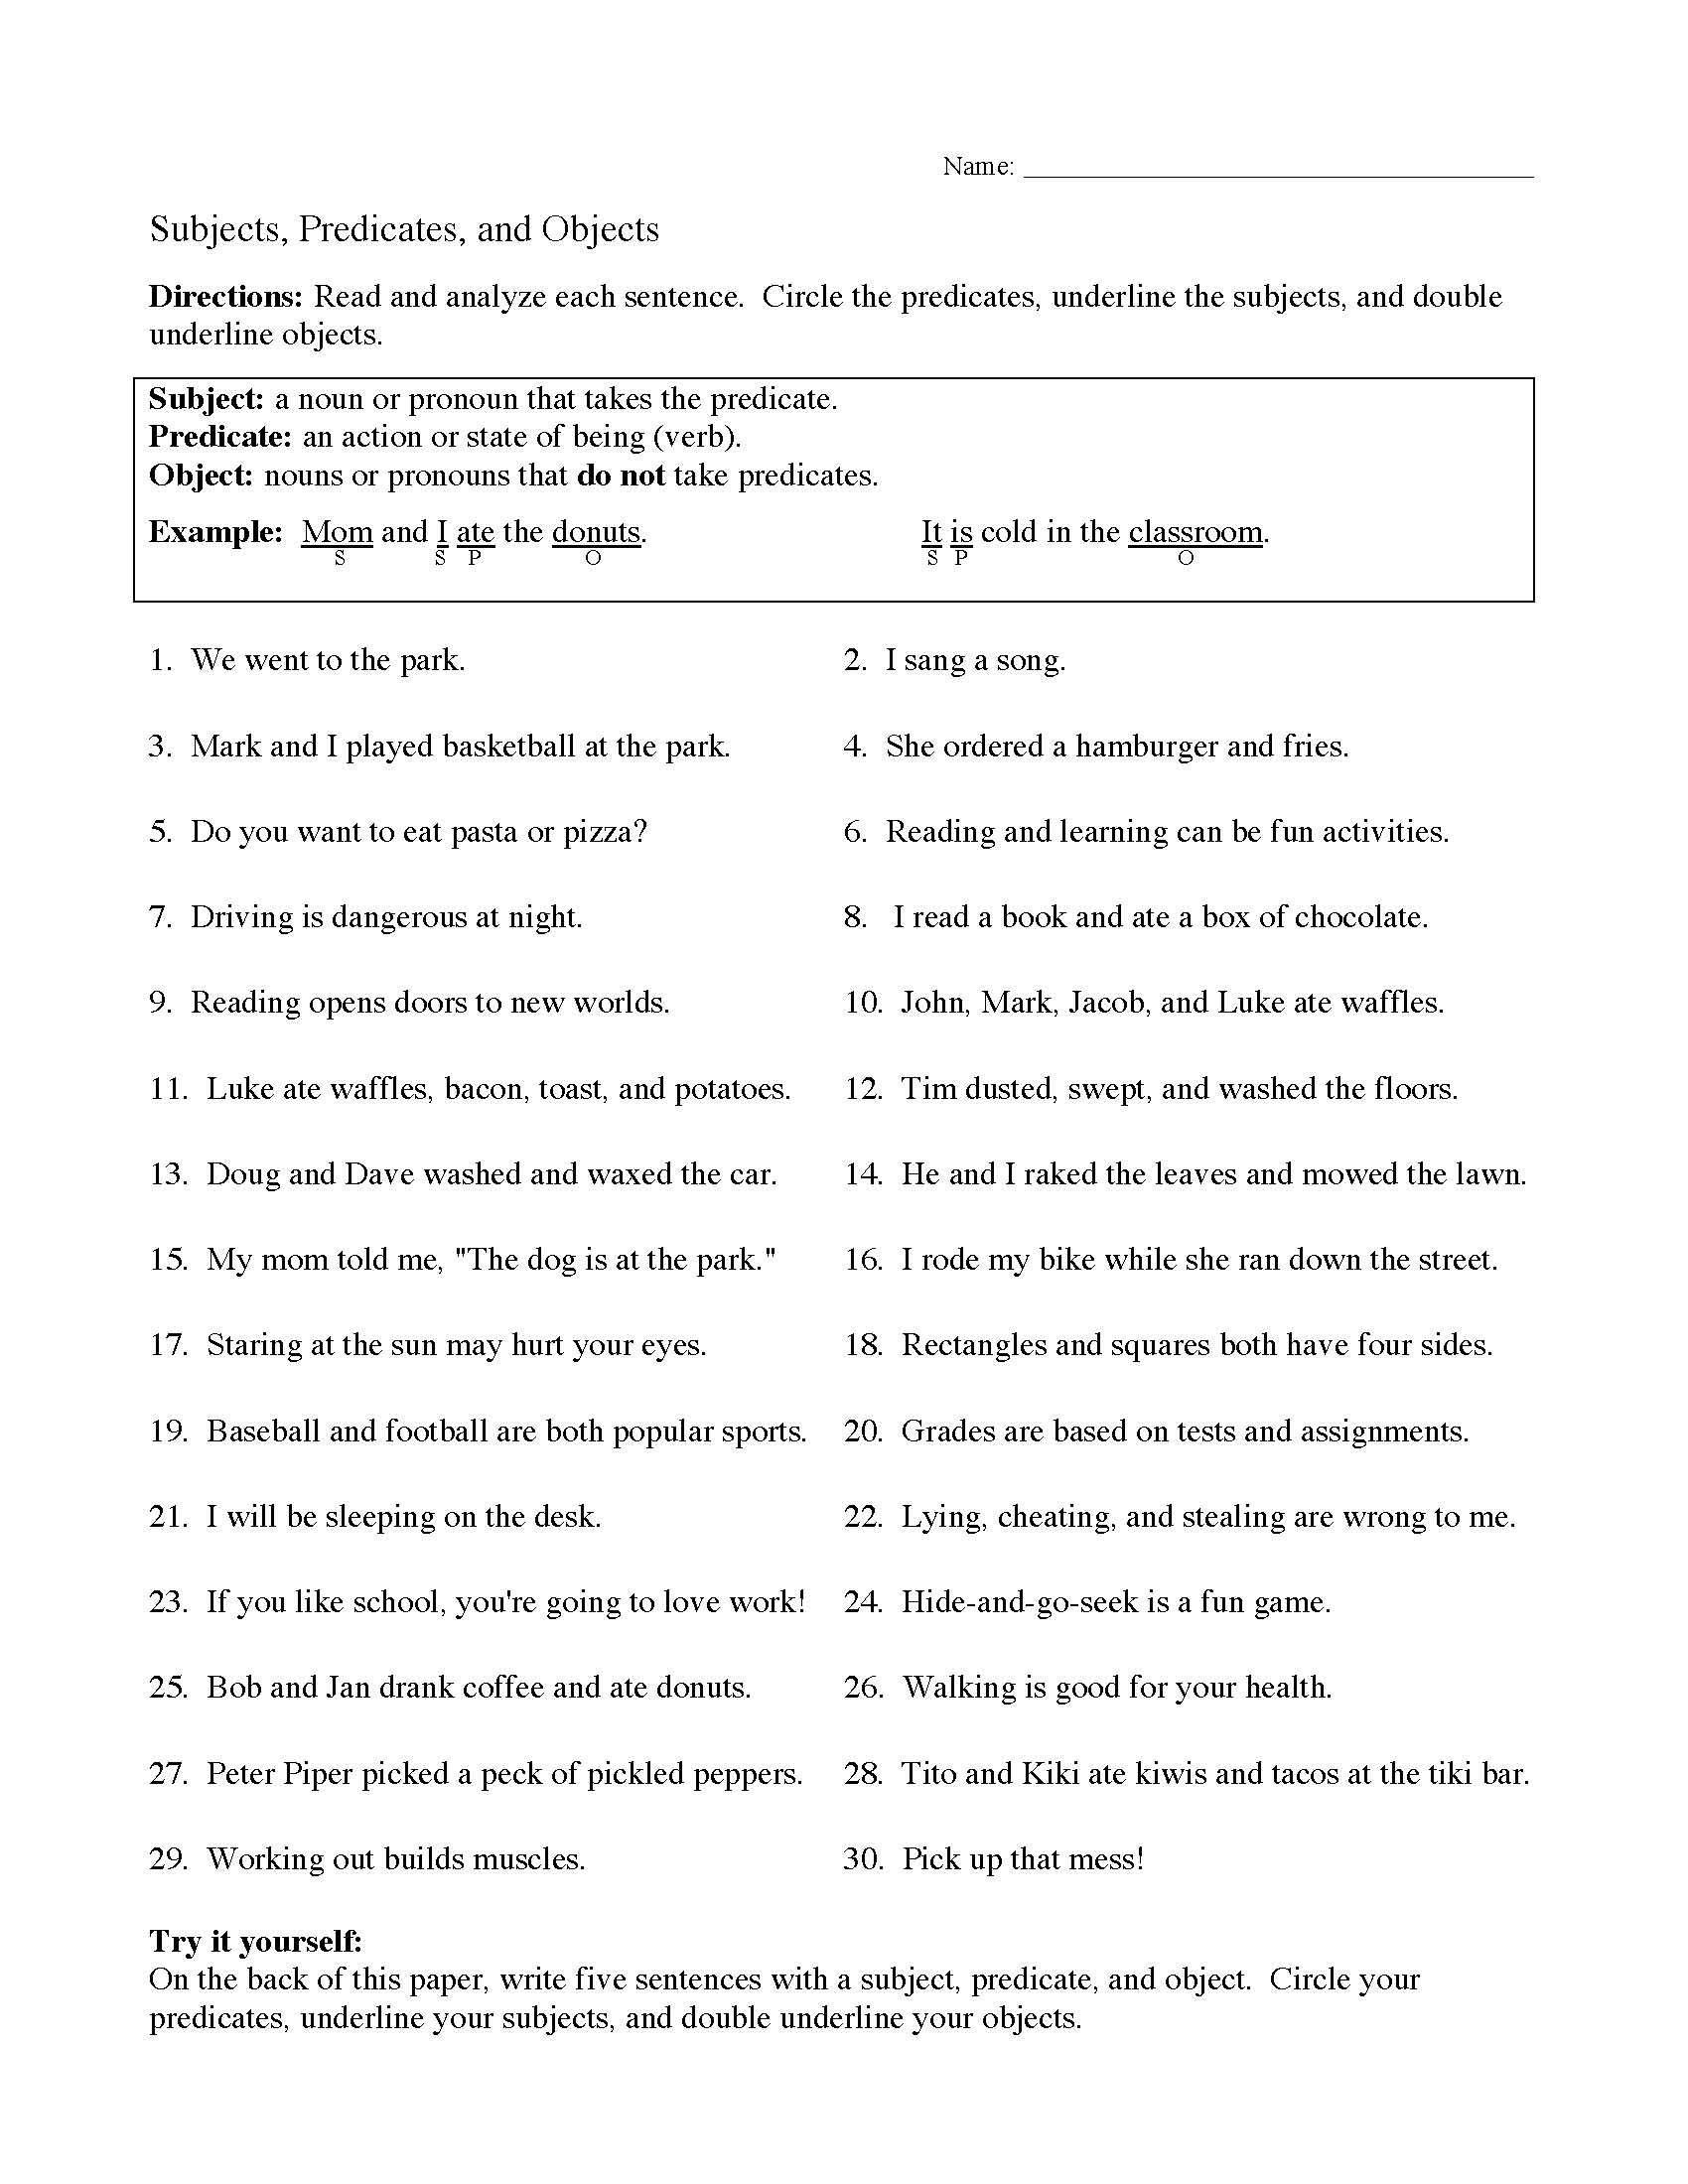 subjects-predicates-and-objects-worksheet-sentence-structure-activity